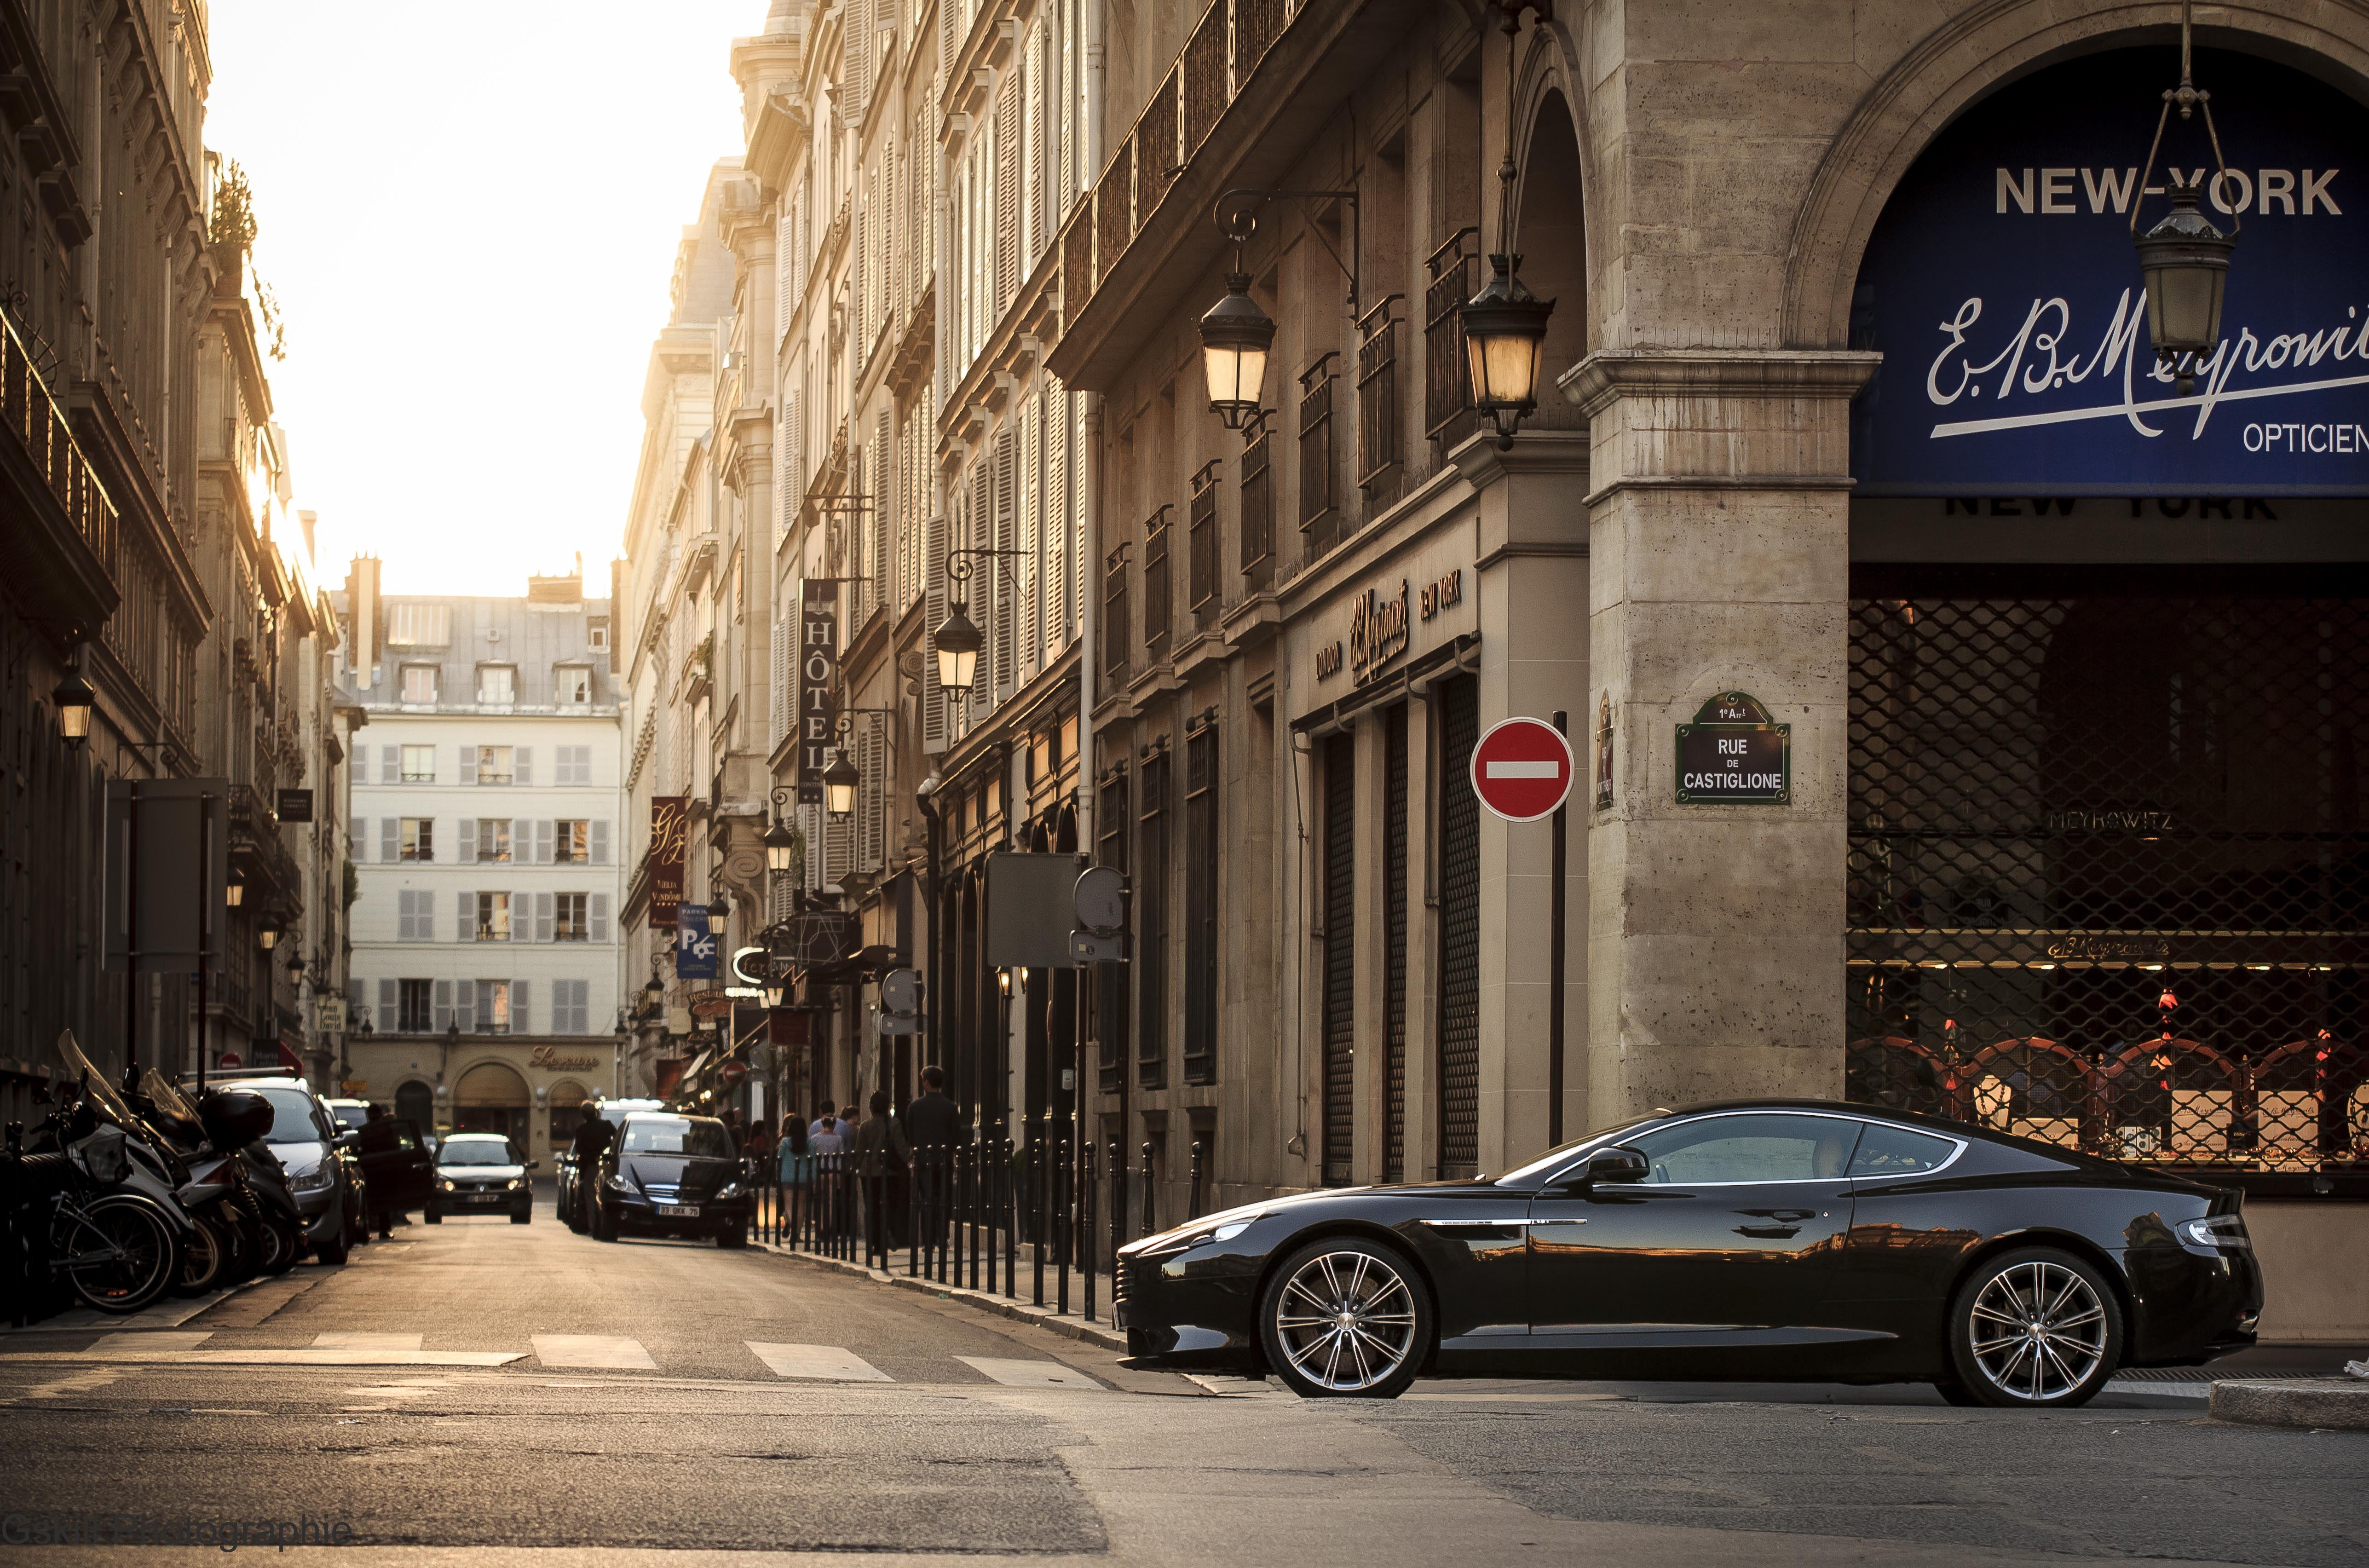 black coupe, Aston Martin, street, building, Turn, side view